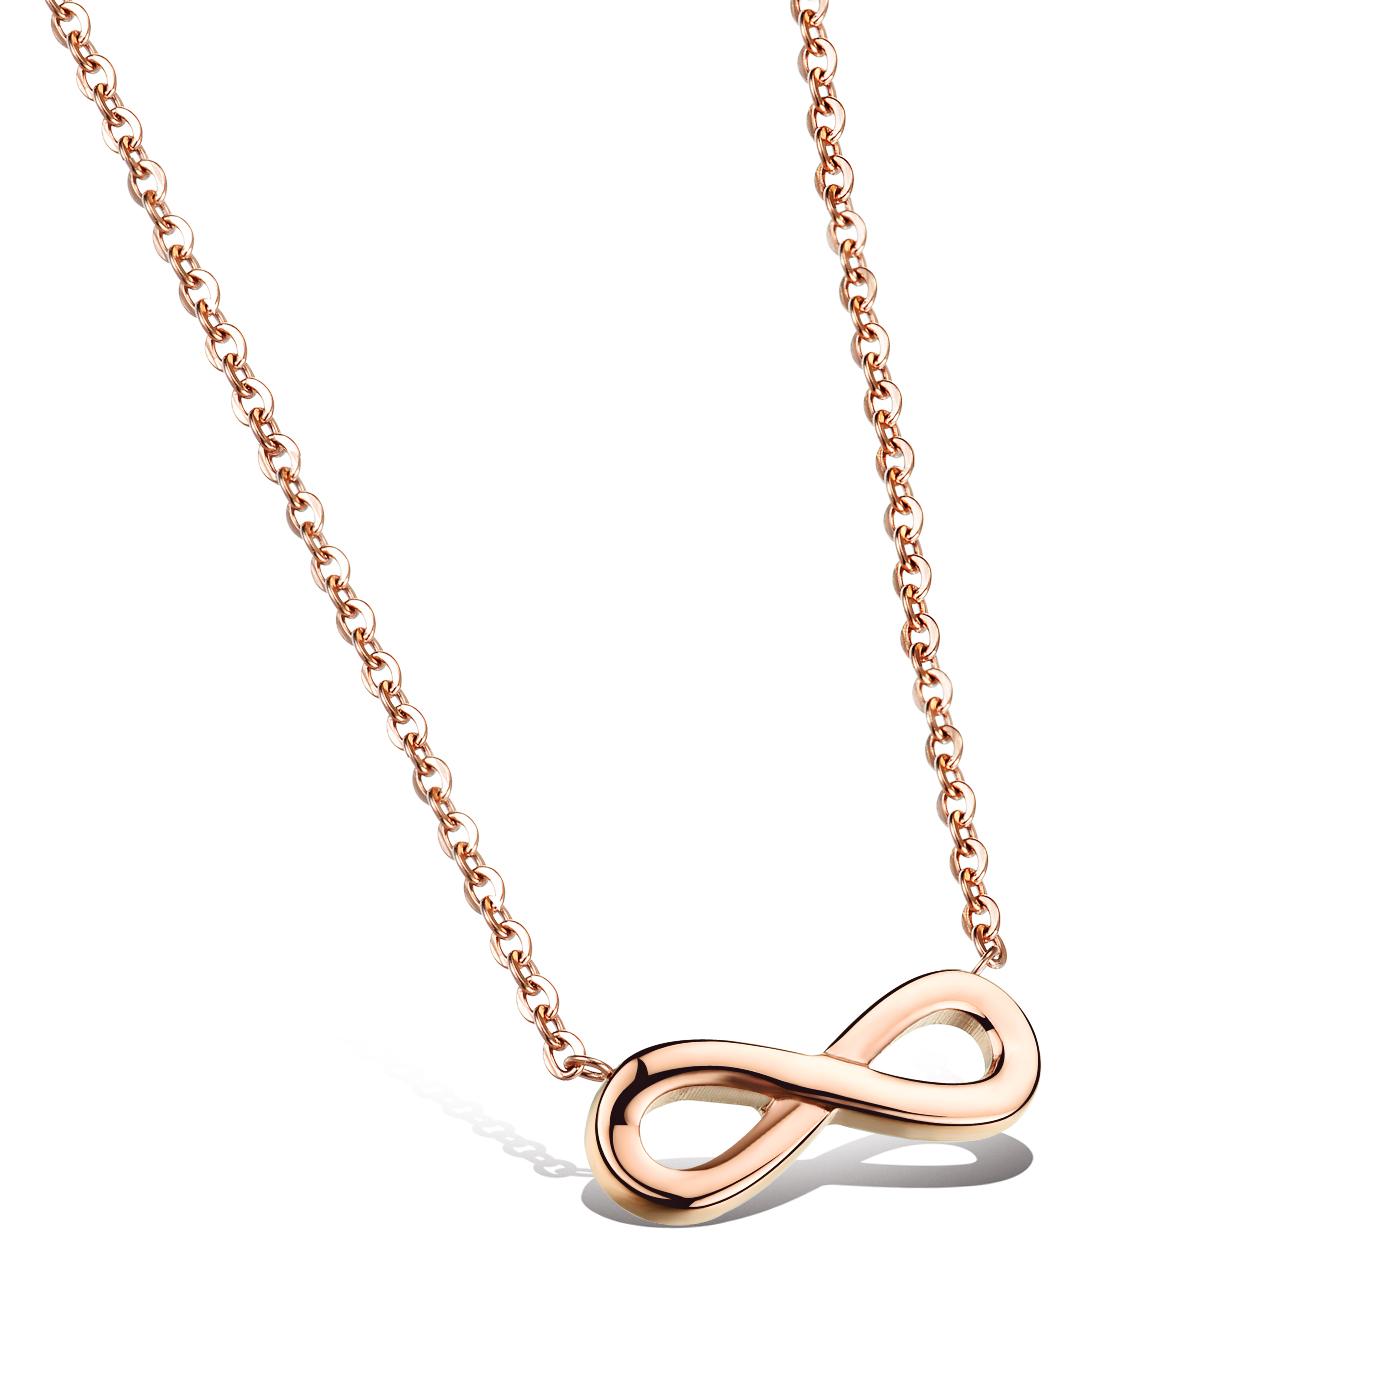 gold necklace for women fashion simple rose gold infinity symbol pendant necklaces women chain  infinity charms necklace eternity ktthfqh